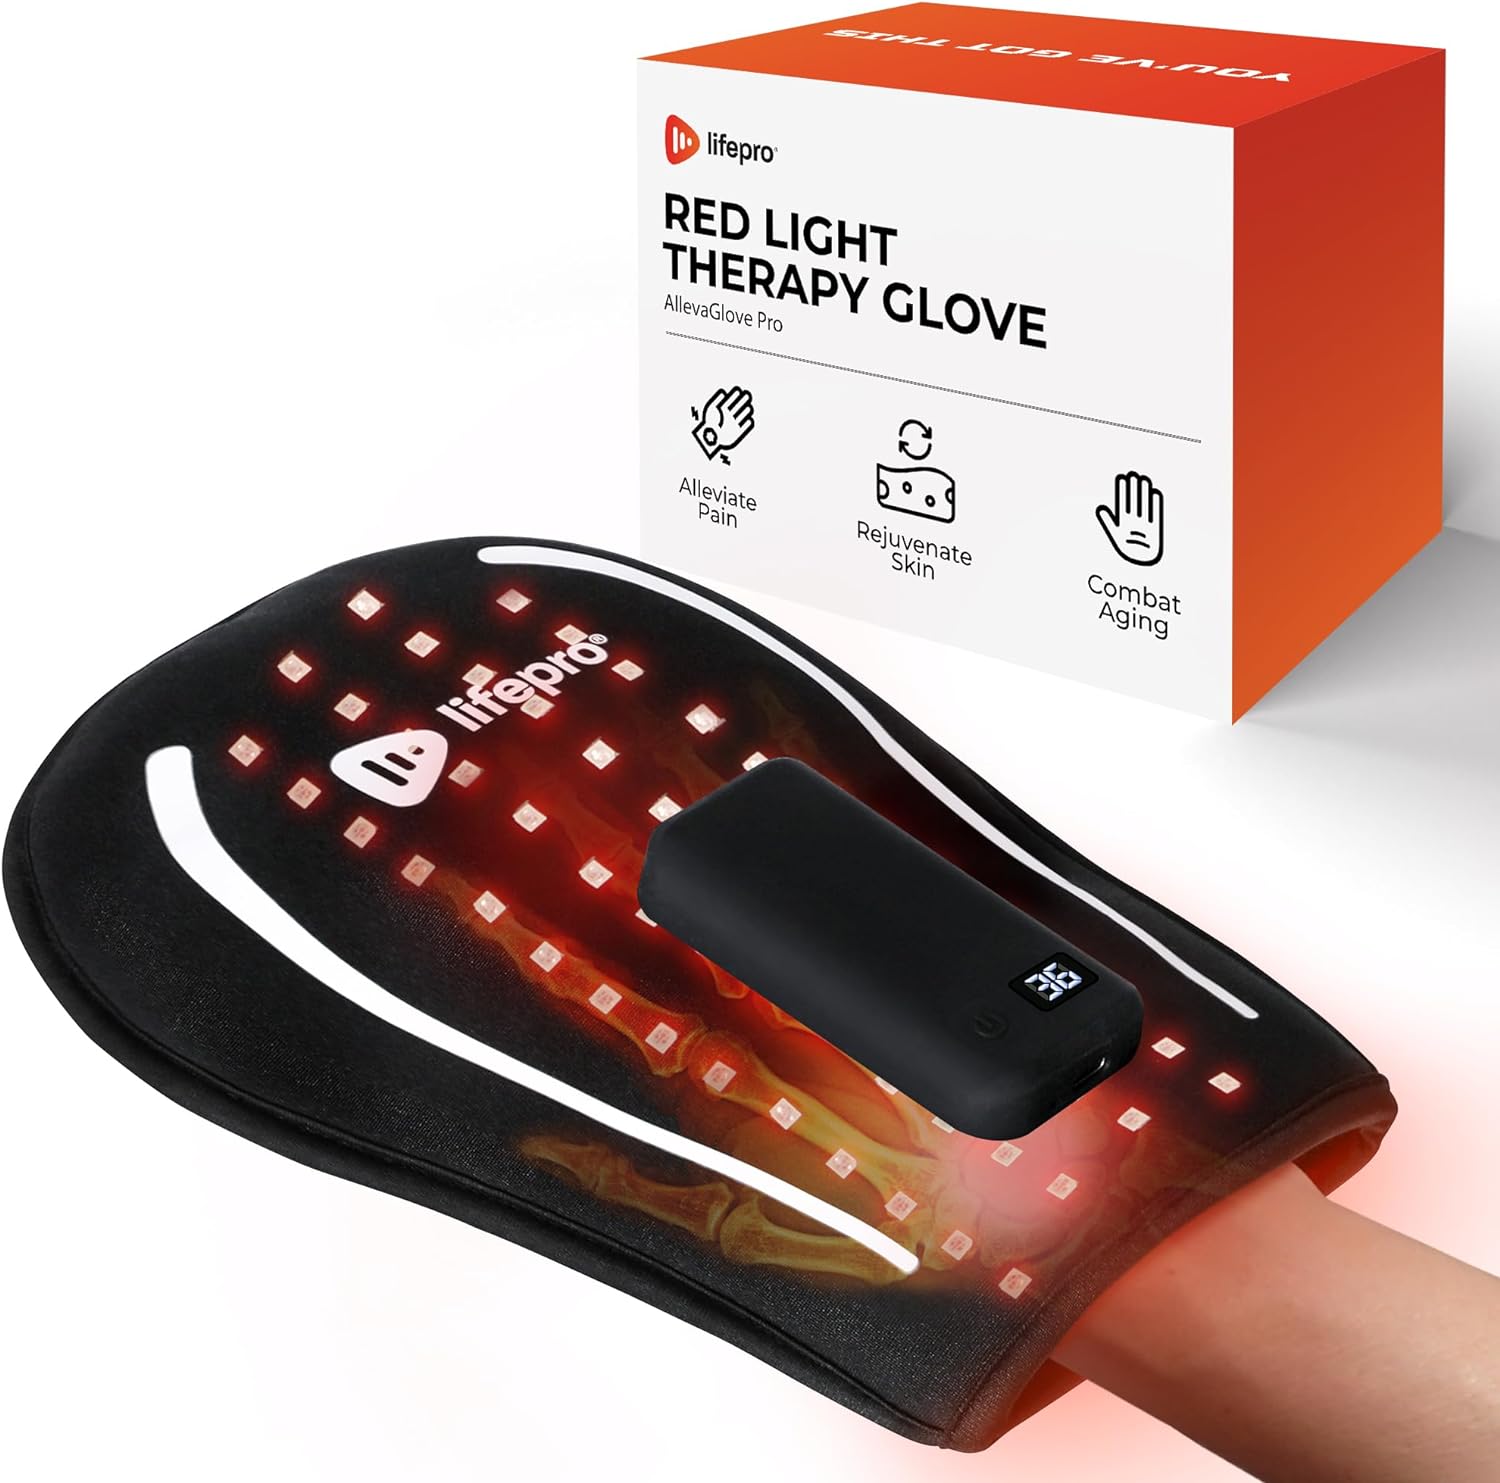 lifepro-red-light-therapy-glove-rechargeable-led-near-infrared-light-therapy-glove-for-hand-stiffness-red-light-therapy